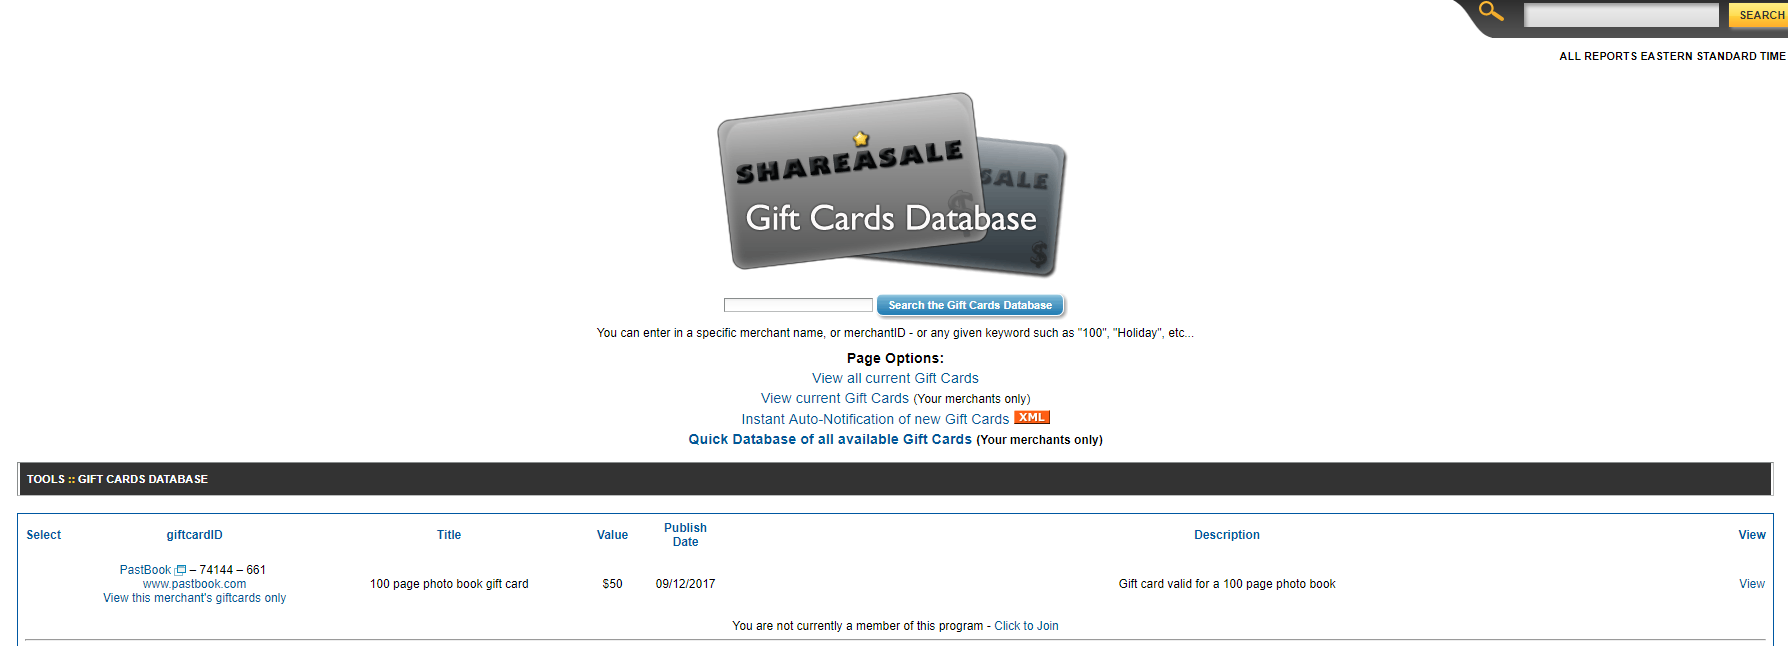 Shareasale's Gift Card Database 